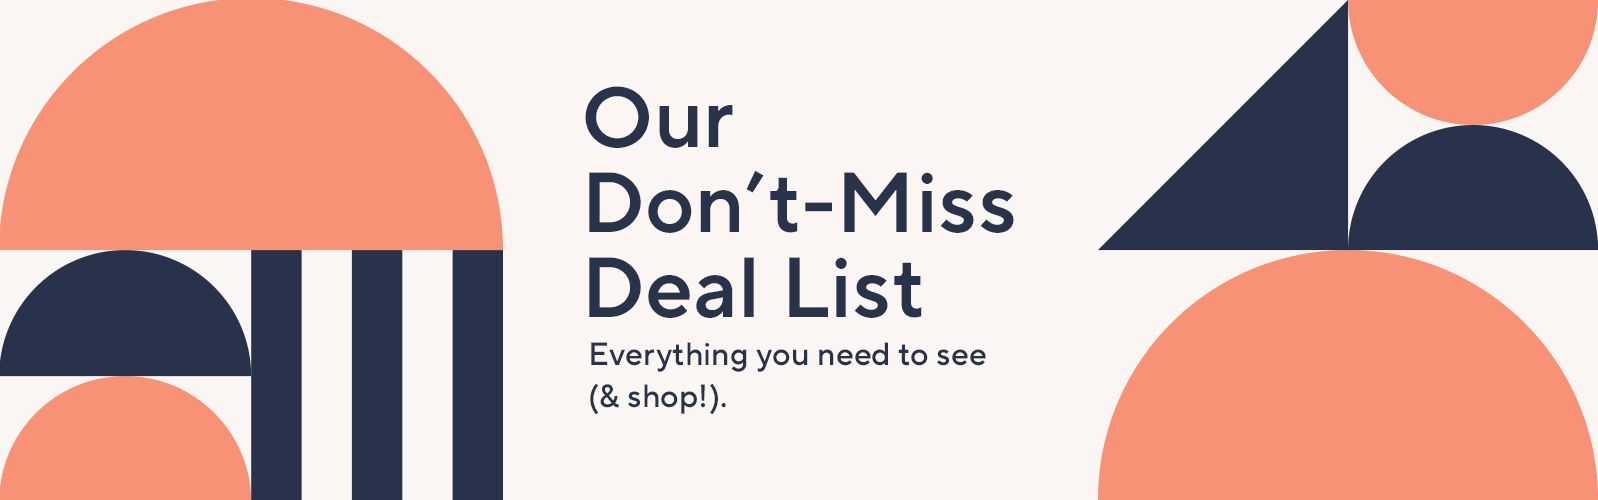 Our Don't-Miss Deal List - Everything you need to see (& shop!).